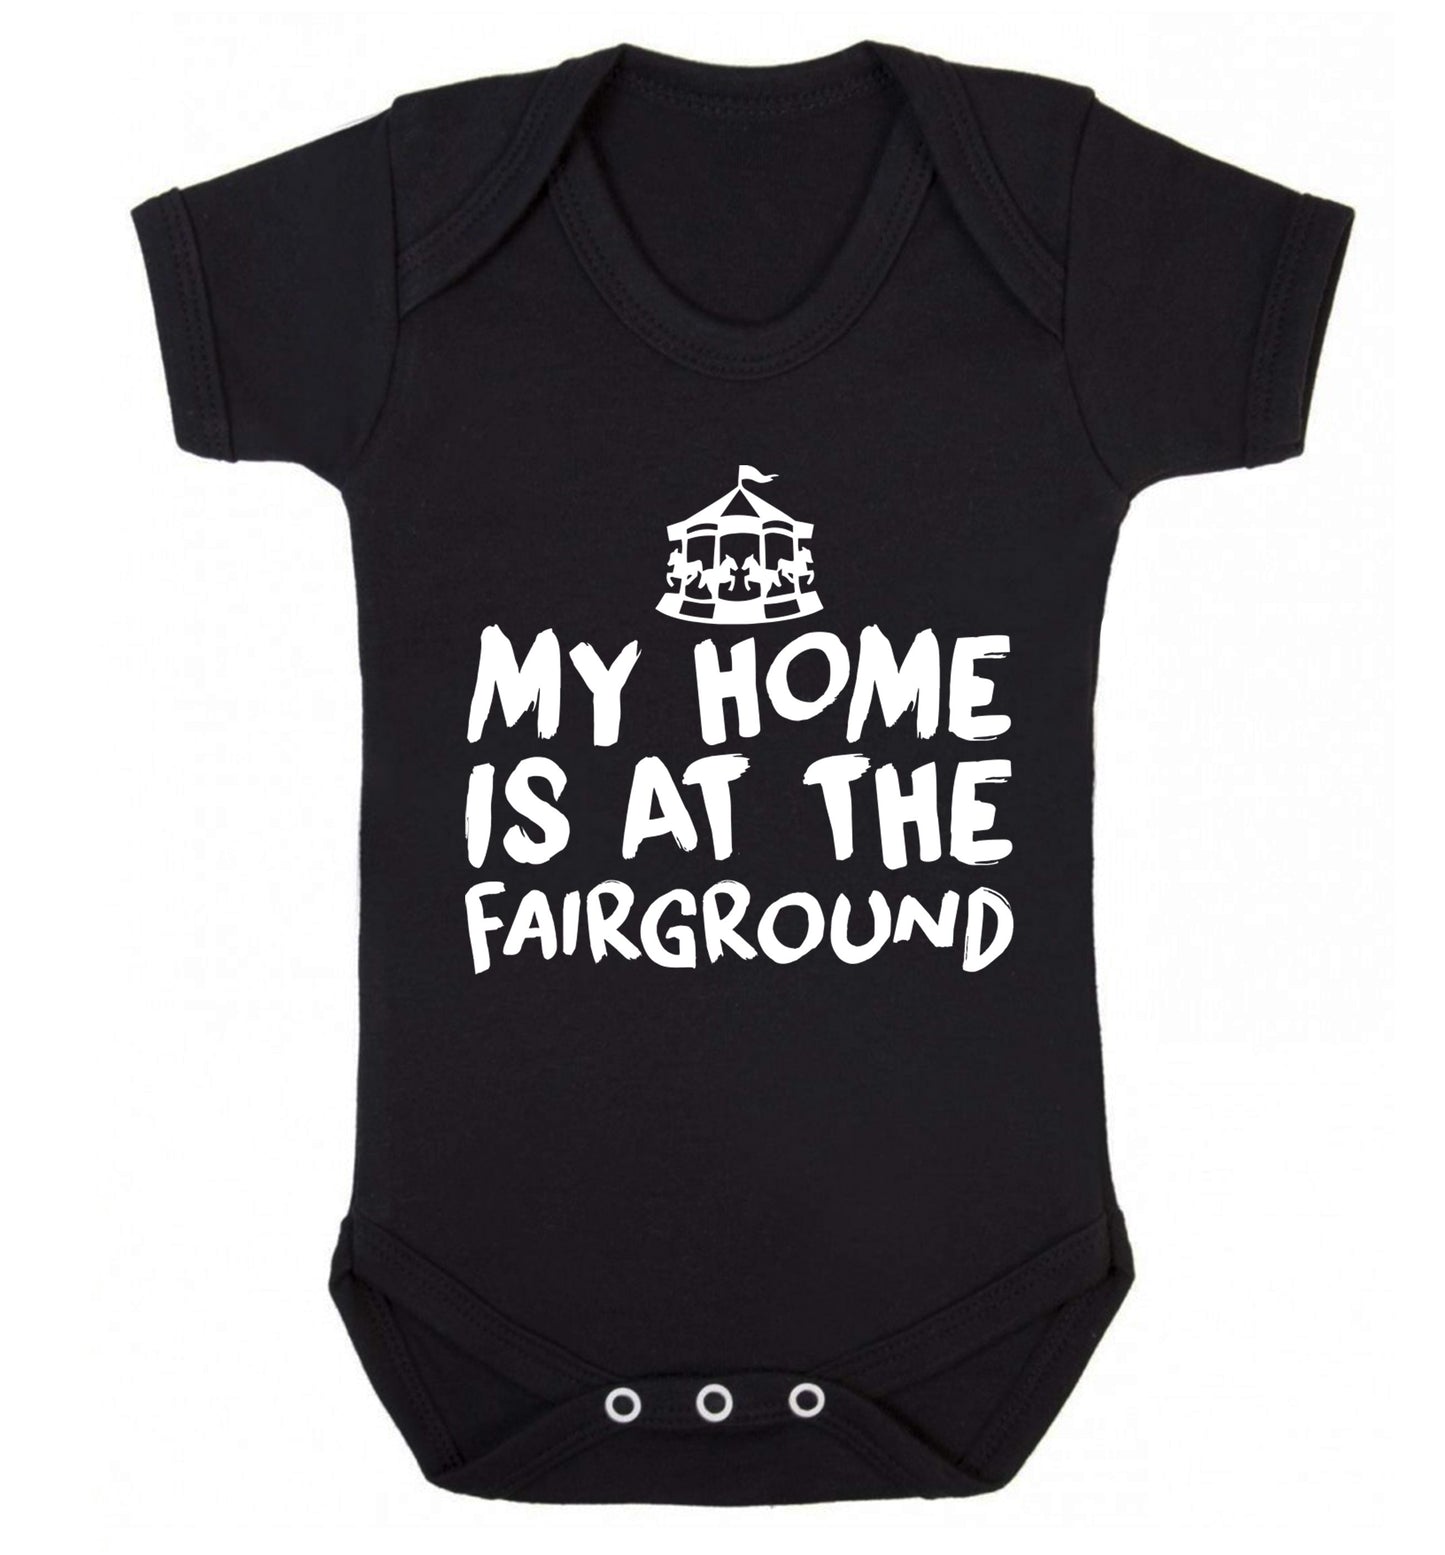 My home is at the fairground Baby Vest black 18-24 months